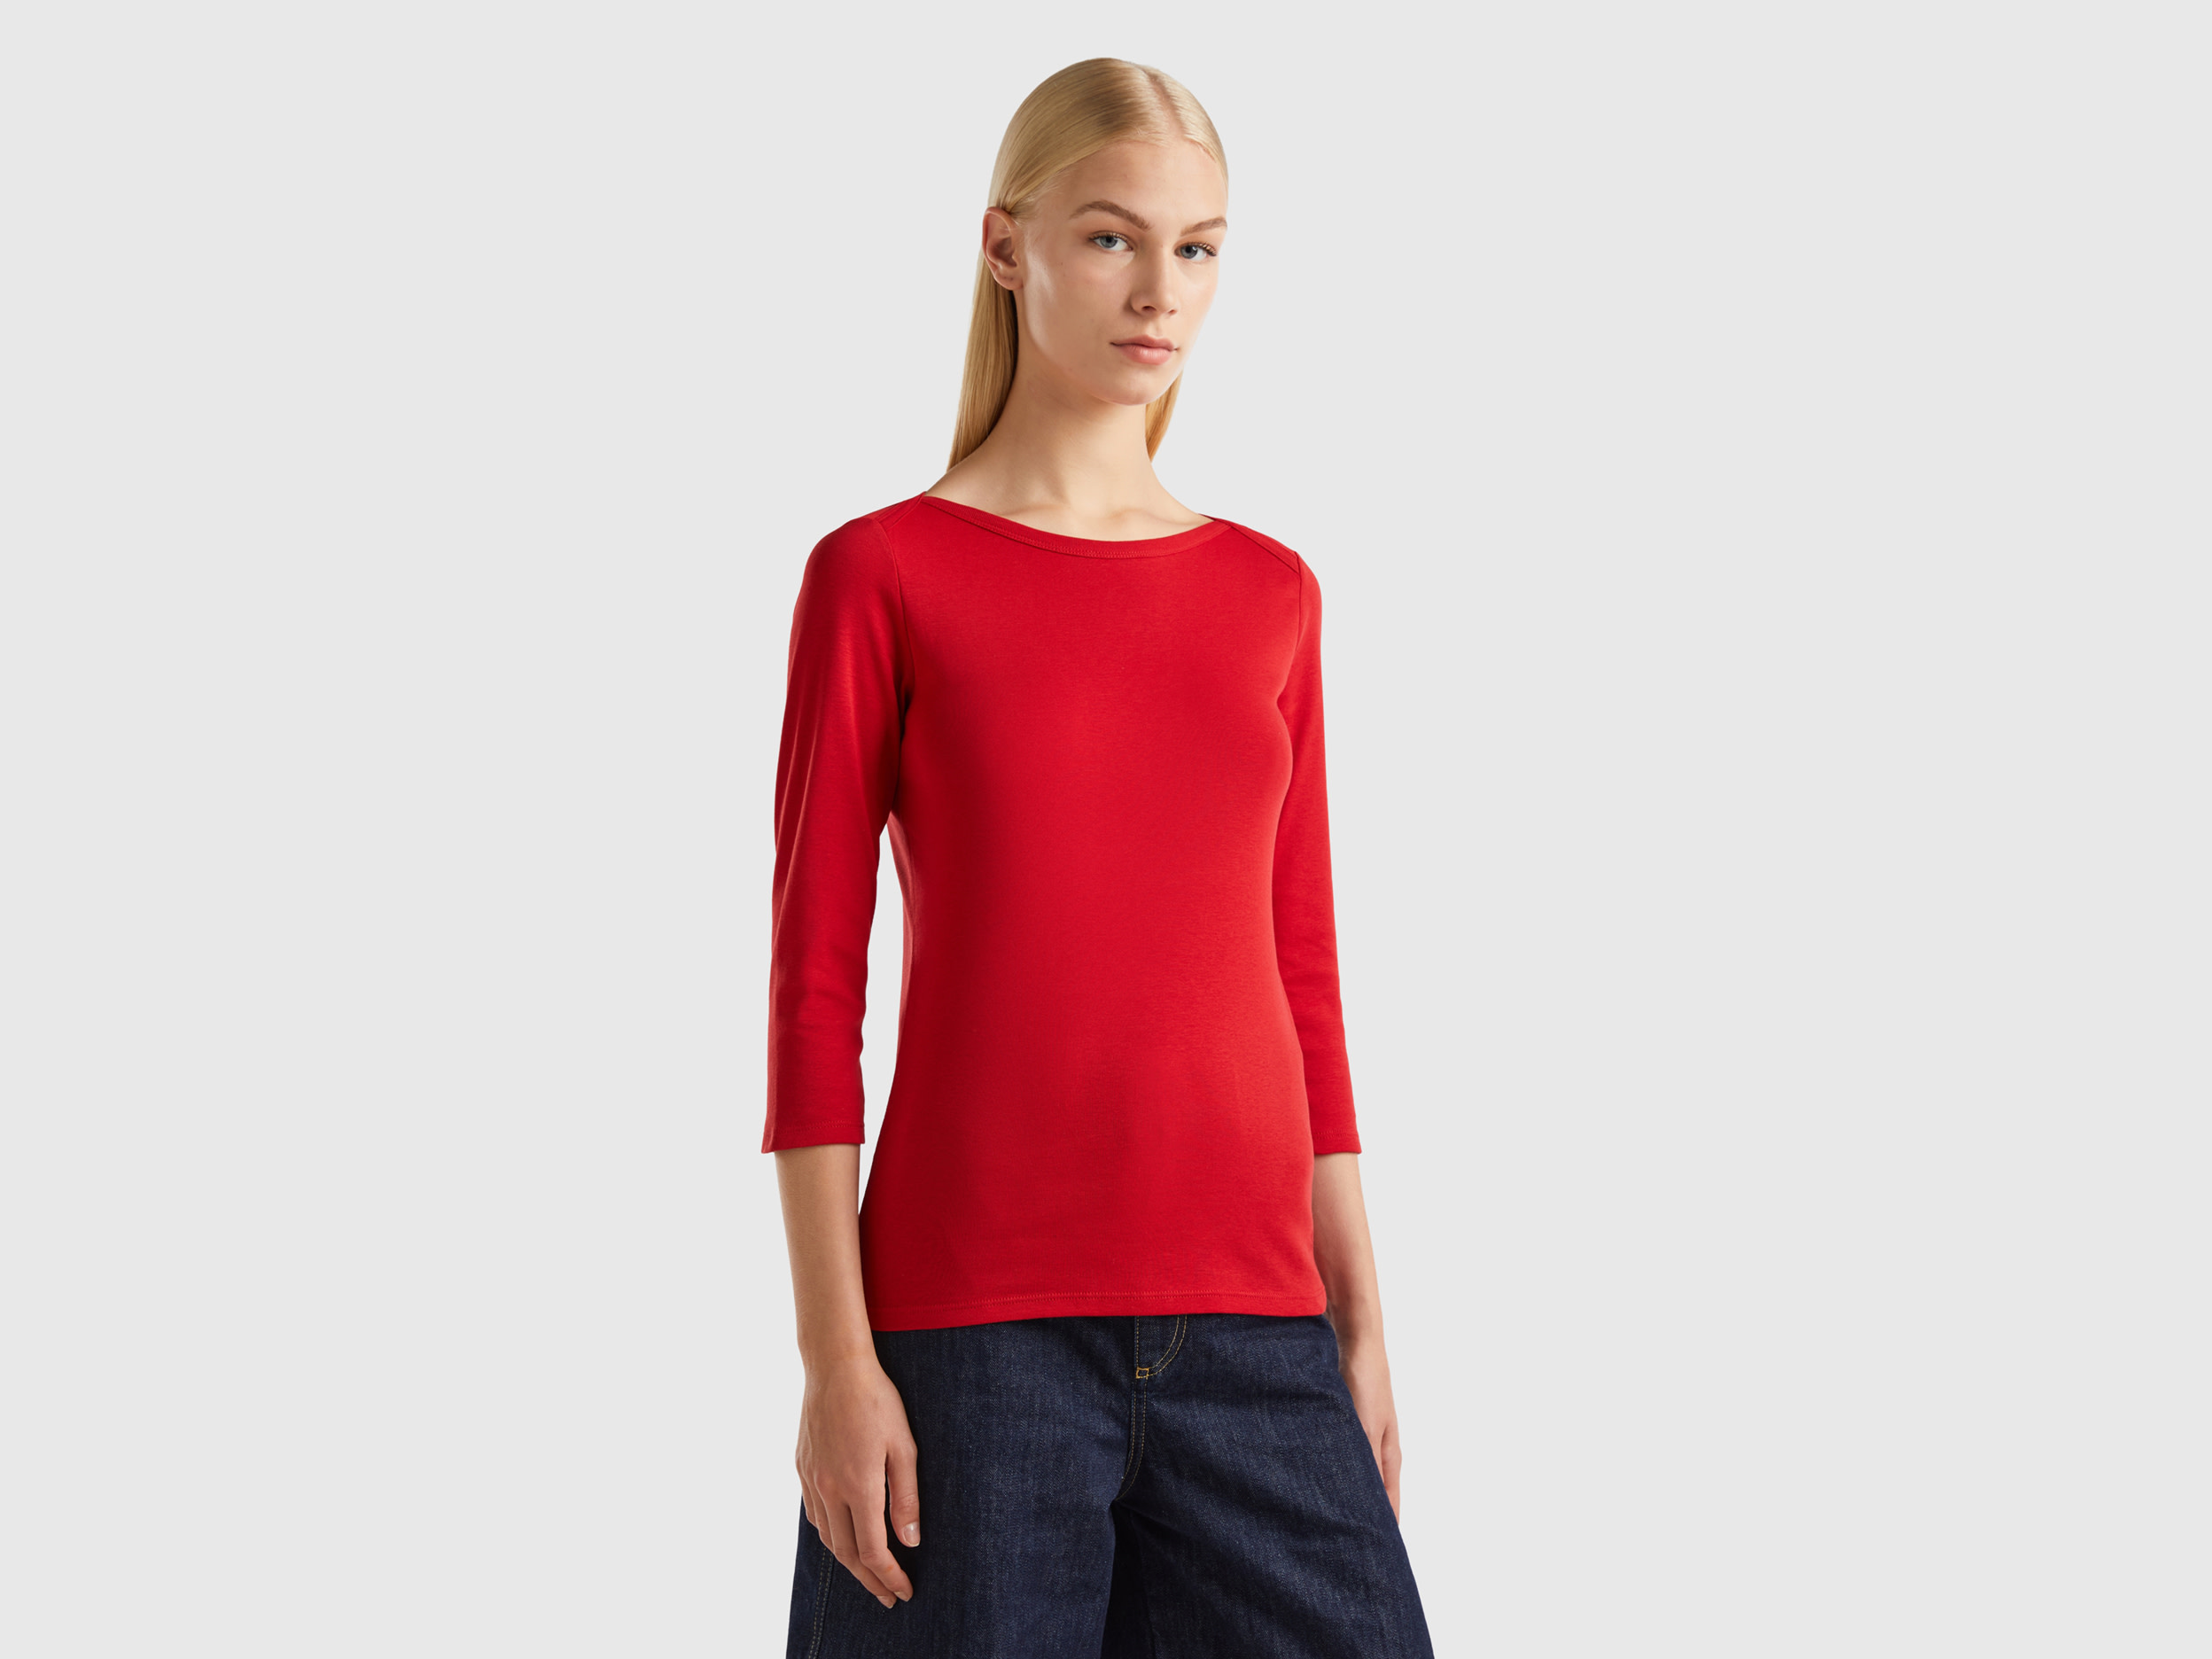 Benetton, T-shirt With Boat Neck In 100% Cotton, size L, Red, Women